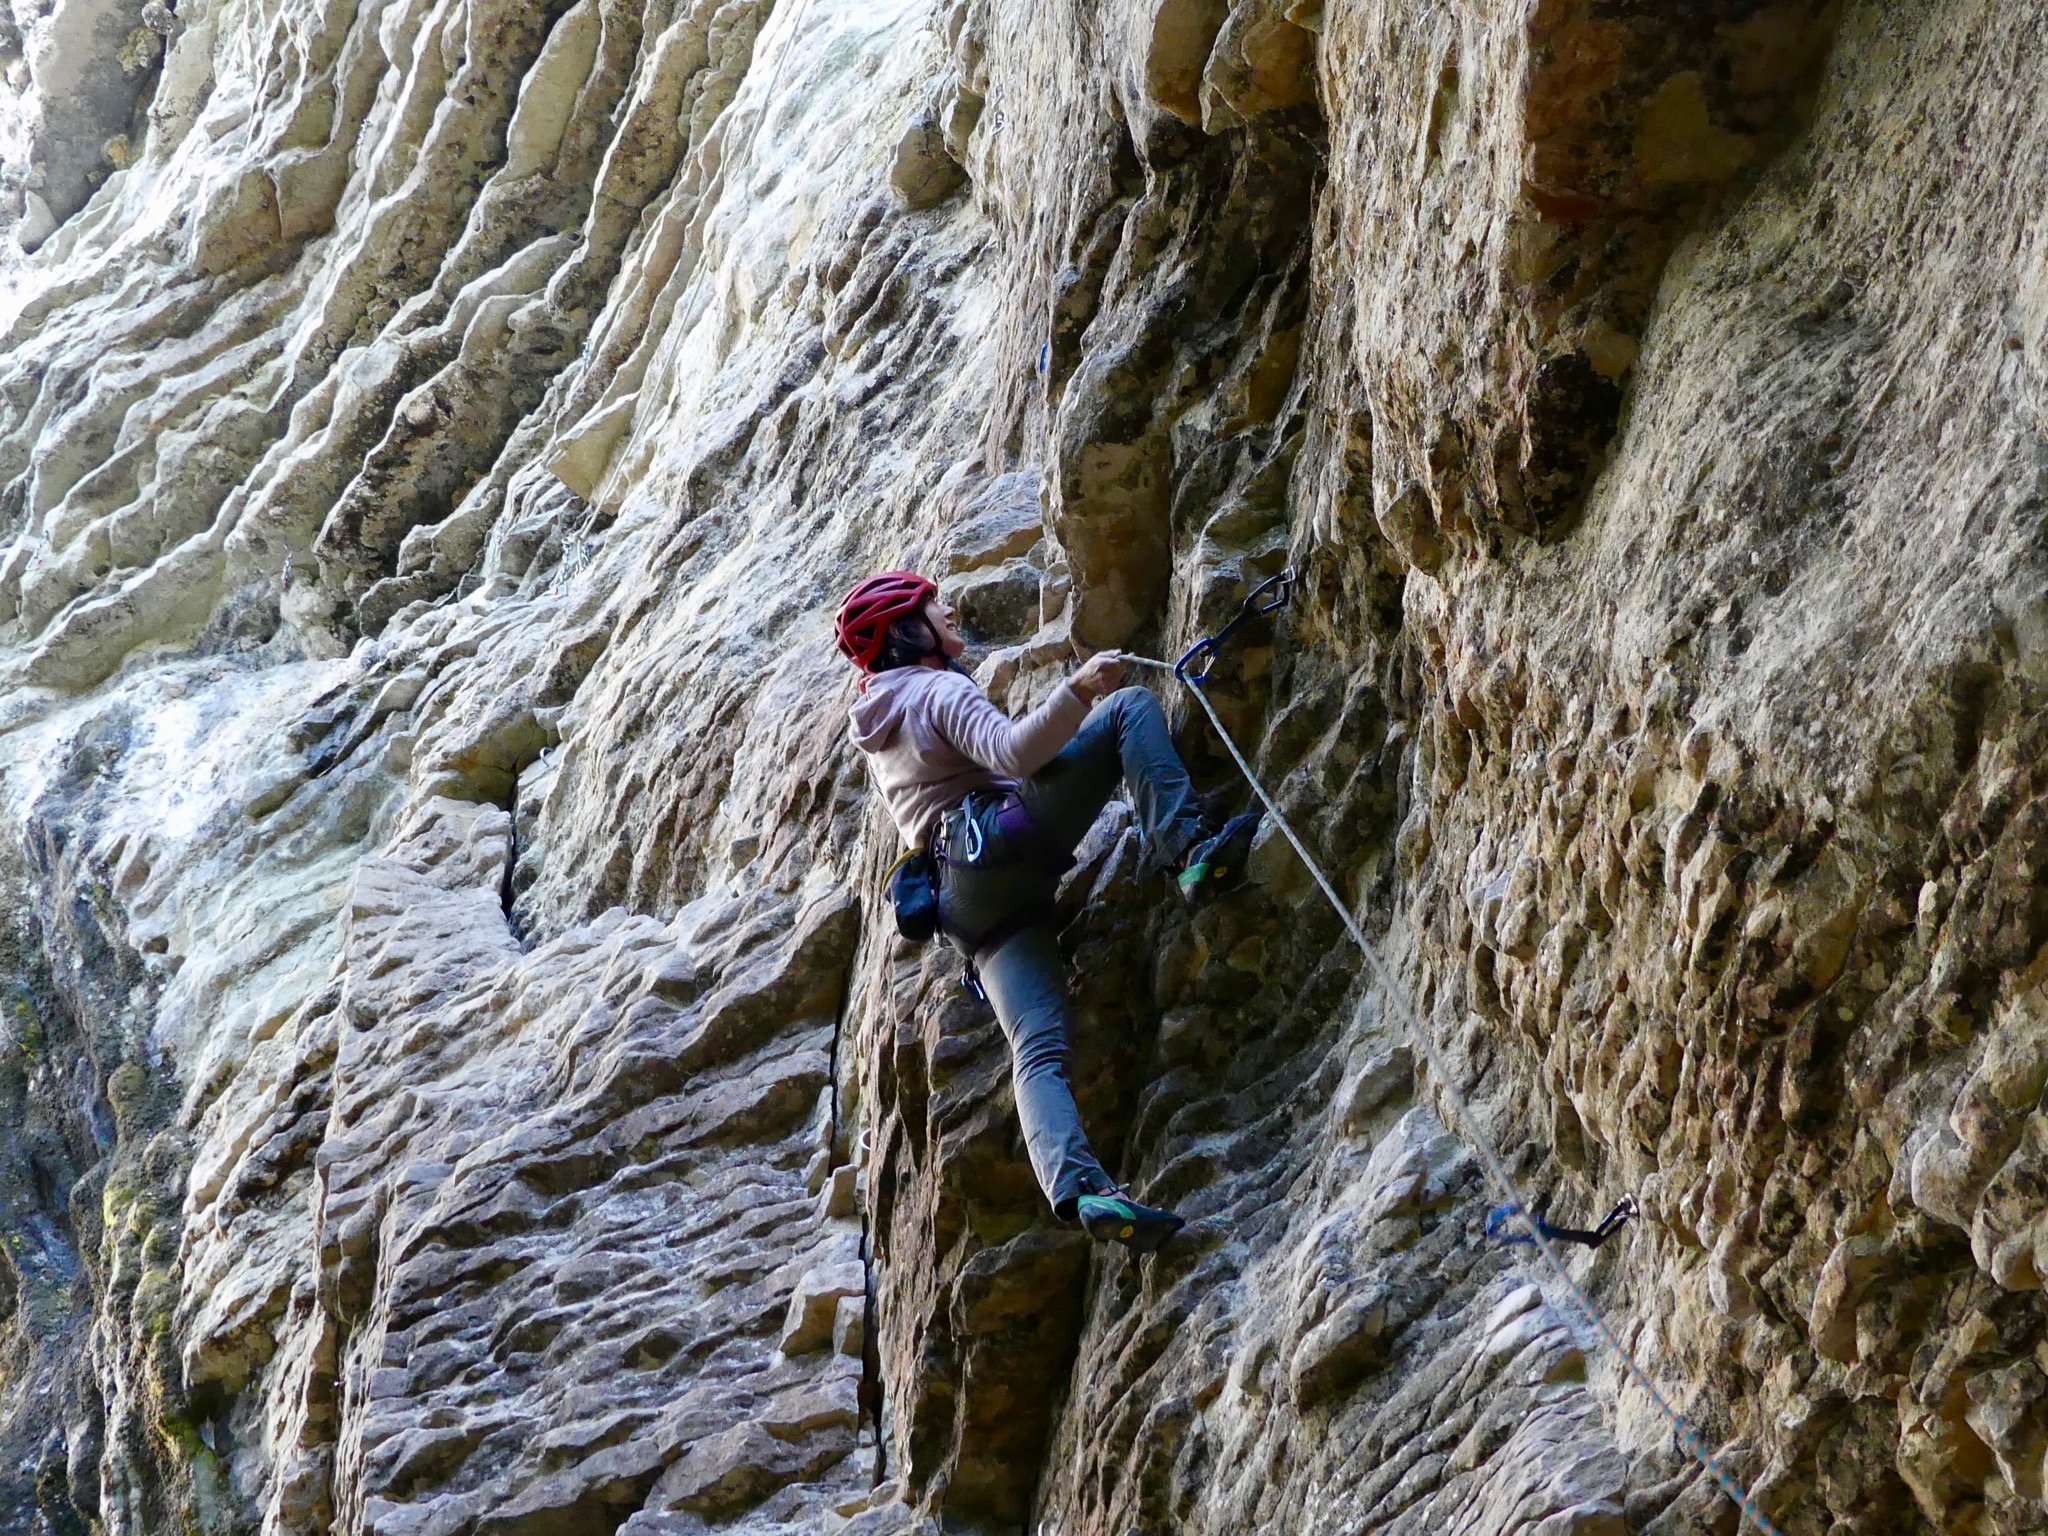 Alex about to clip the fourth bolt on Trojan Kat (grade 20) in the Colosseum at Mangaokewa